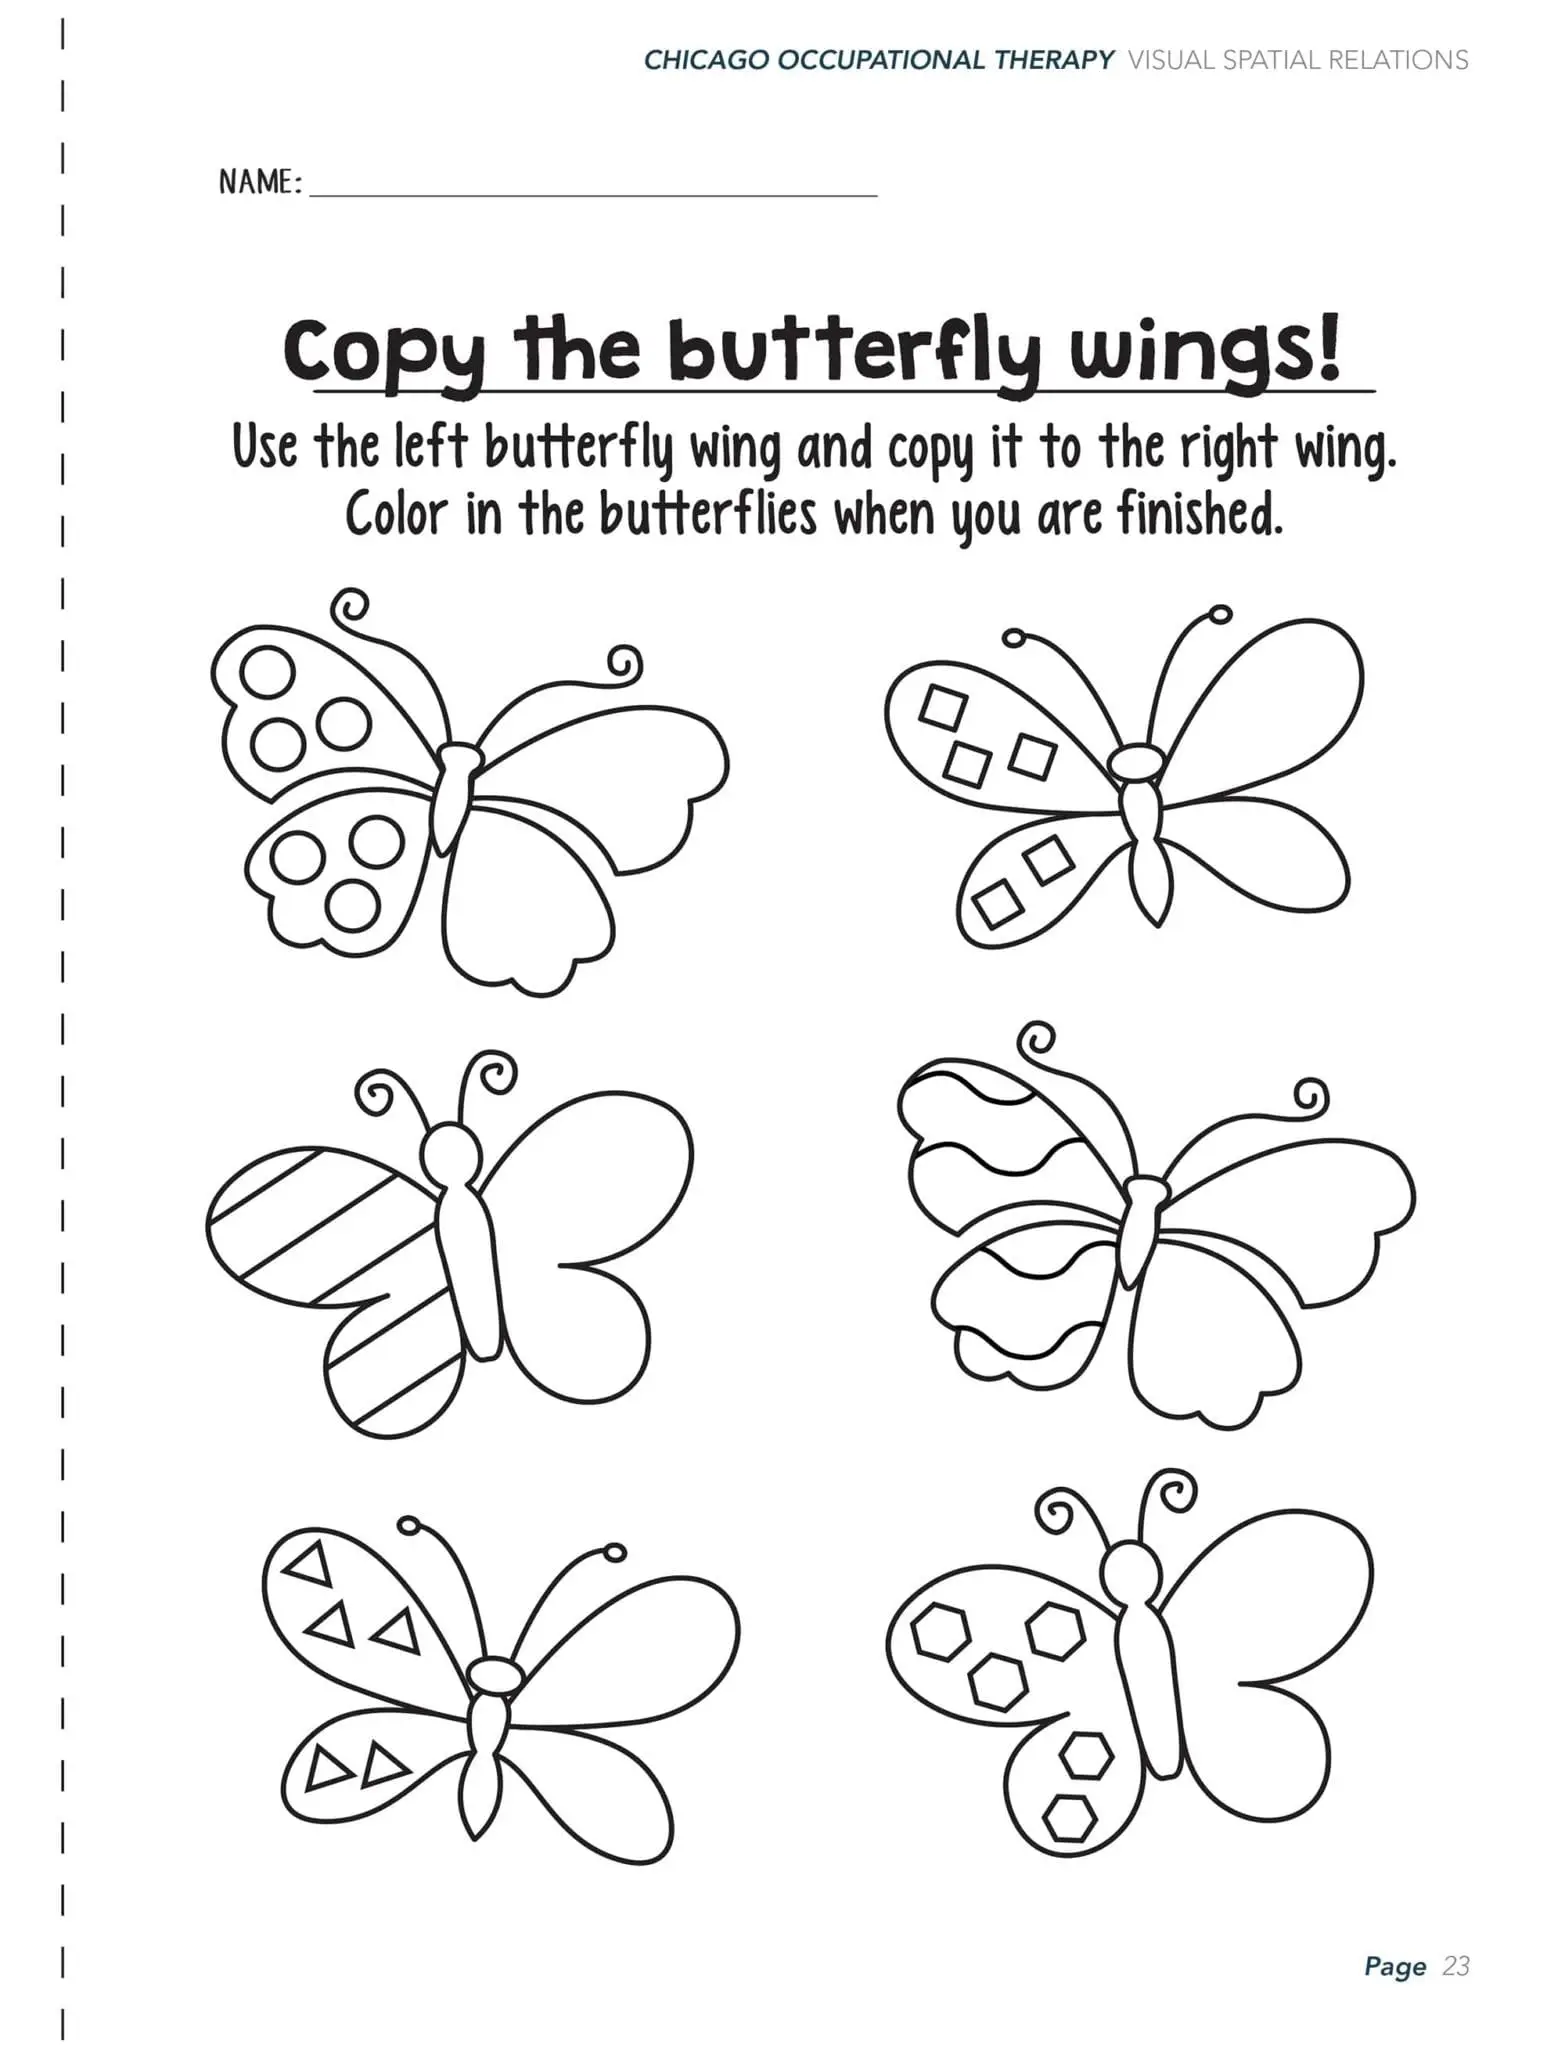 Visual Perceptual Activity Worksheets Chicago Occupational Therapy